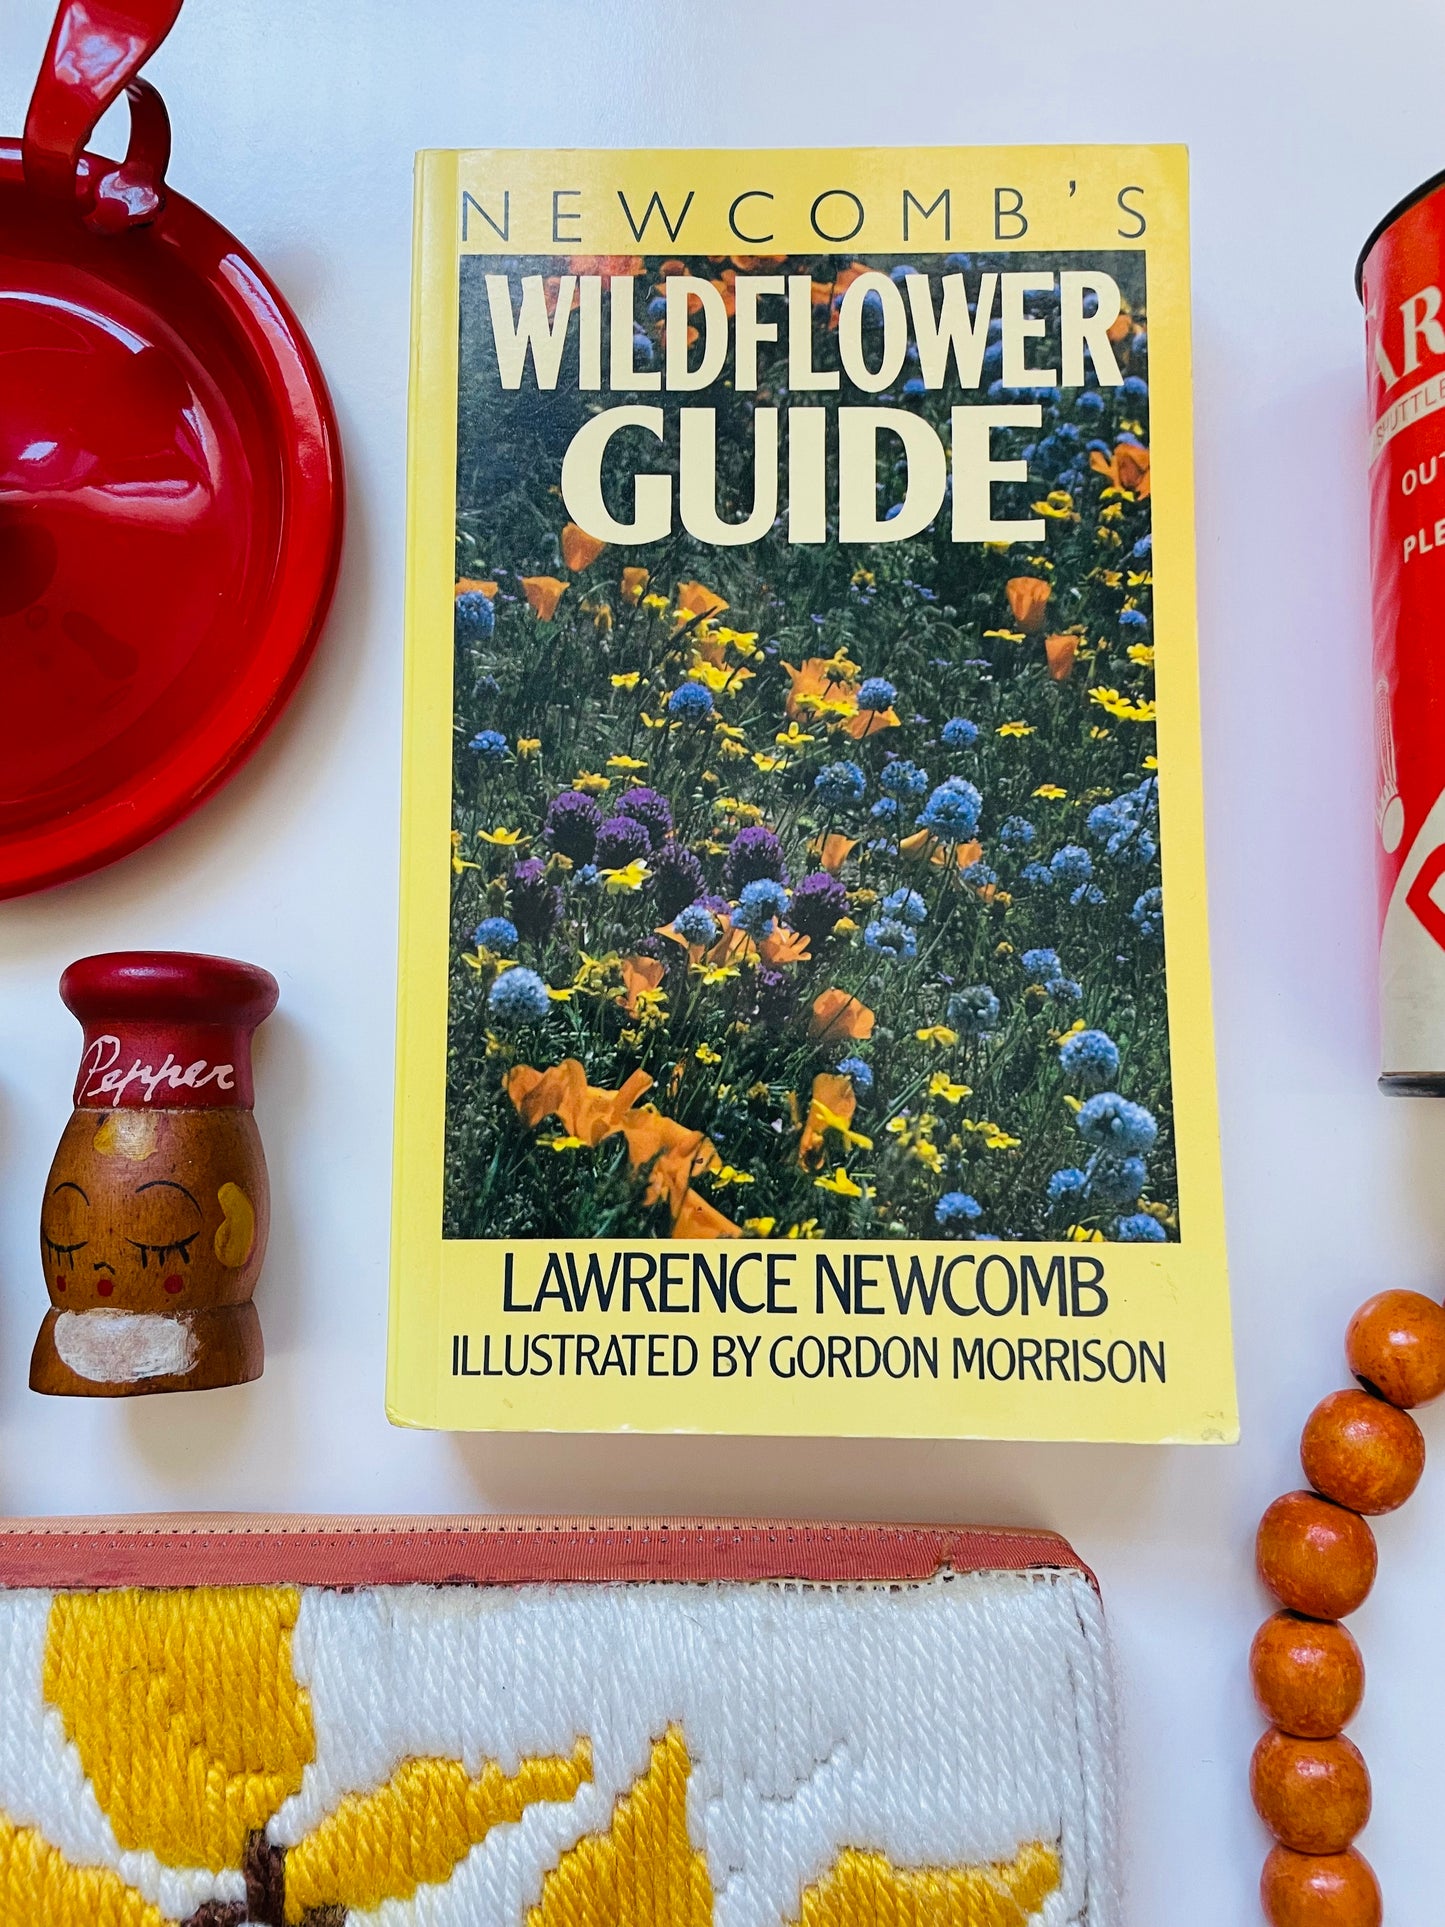 Newcomb's Wildflower Guide Book with Illustrations by Gordon Morrison (1977)